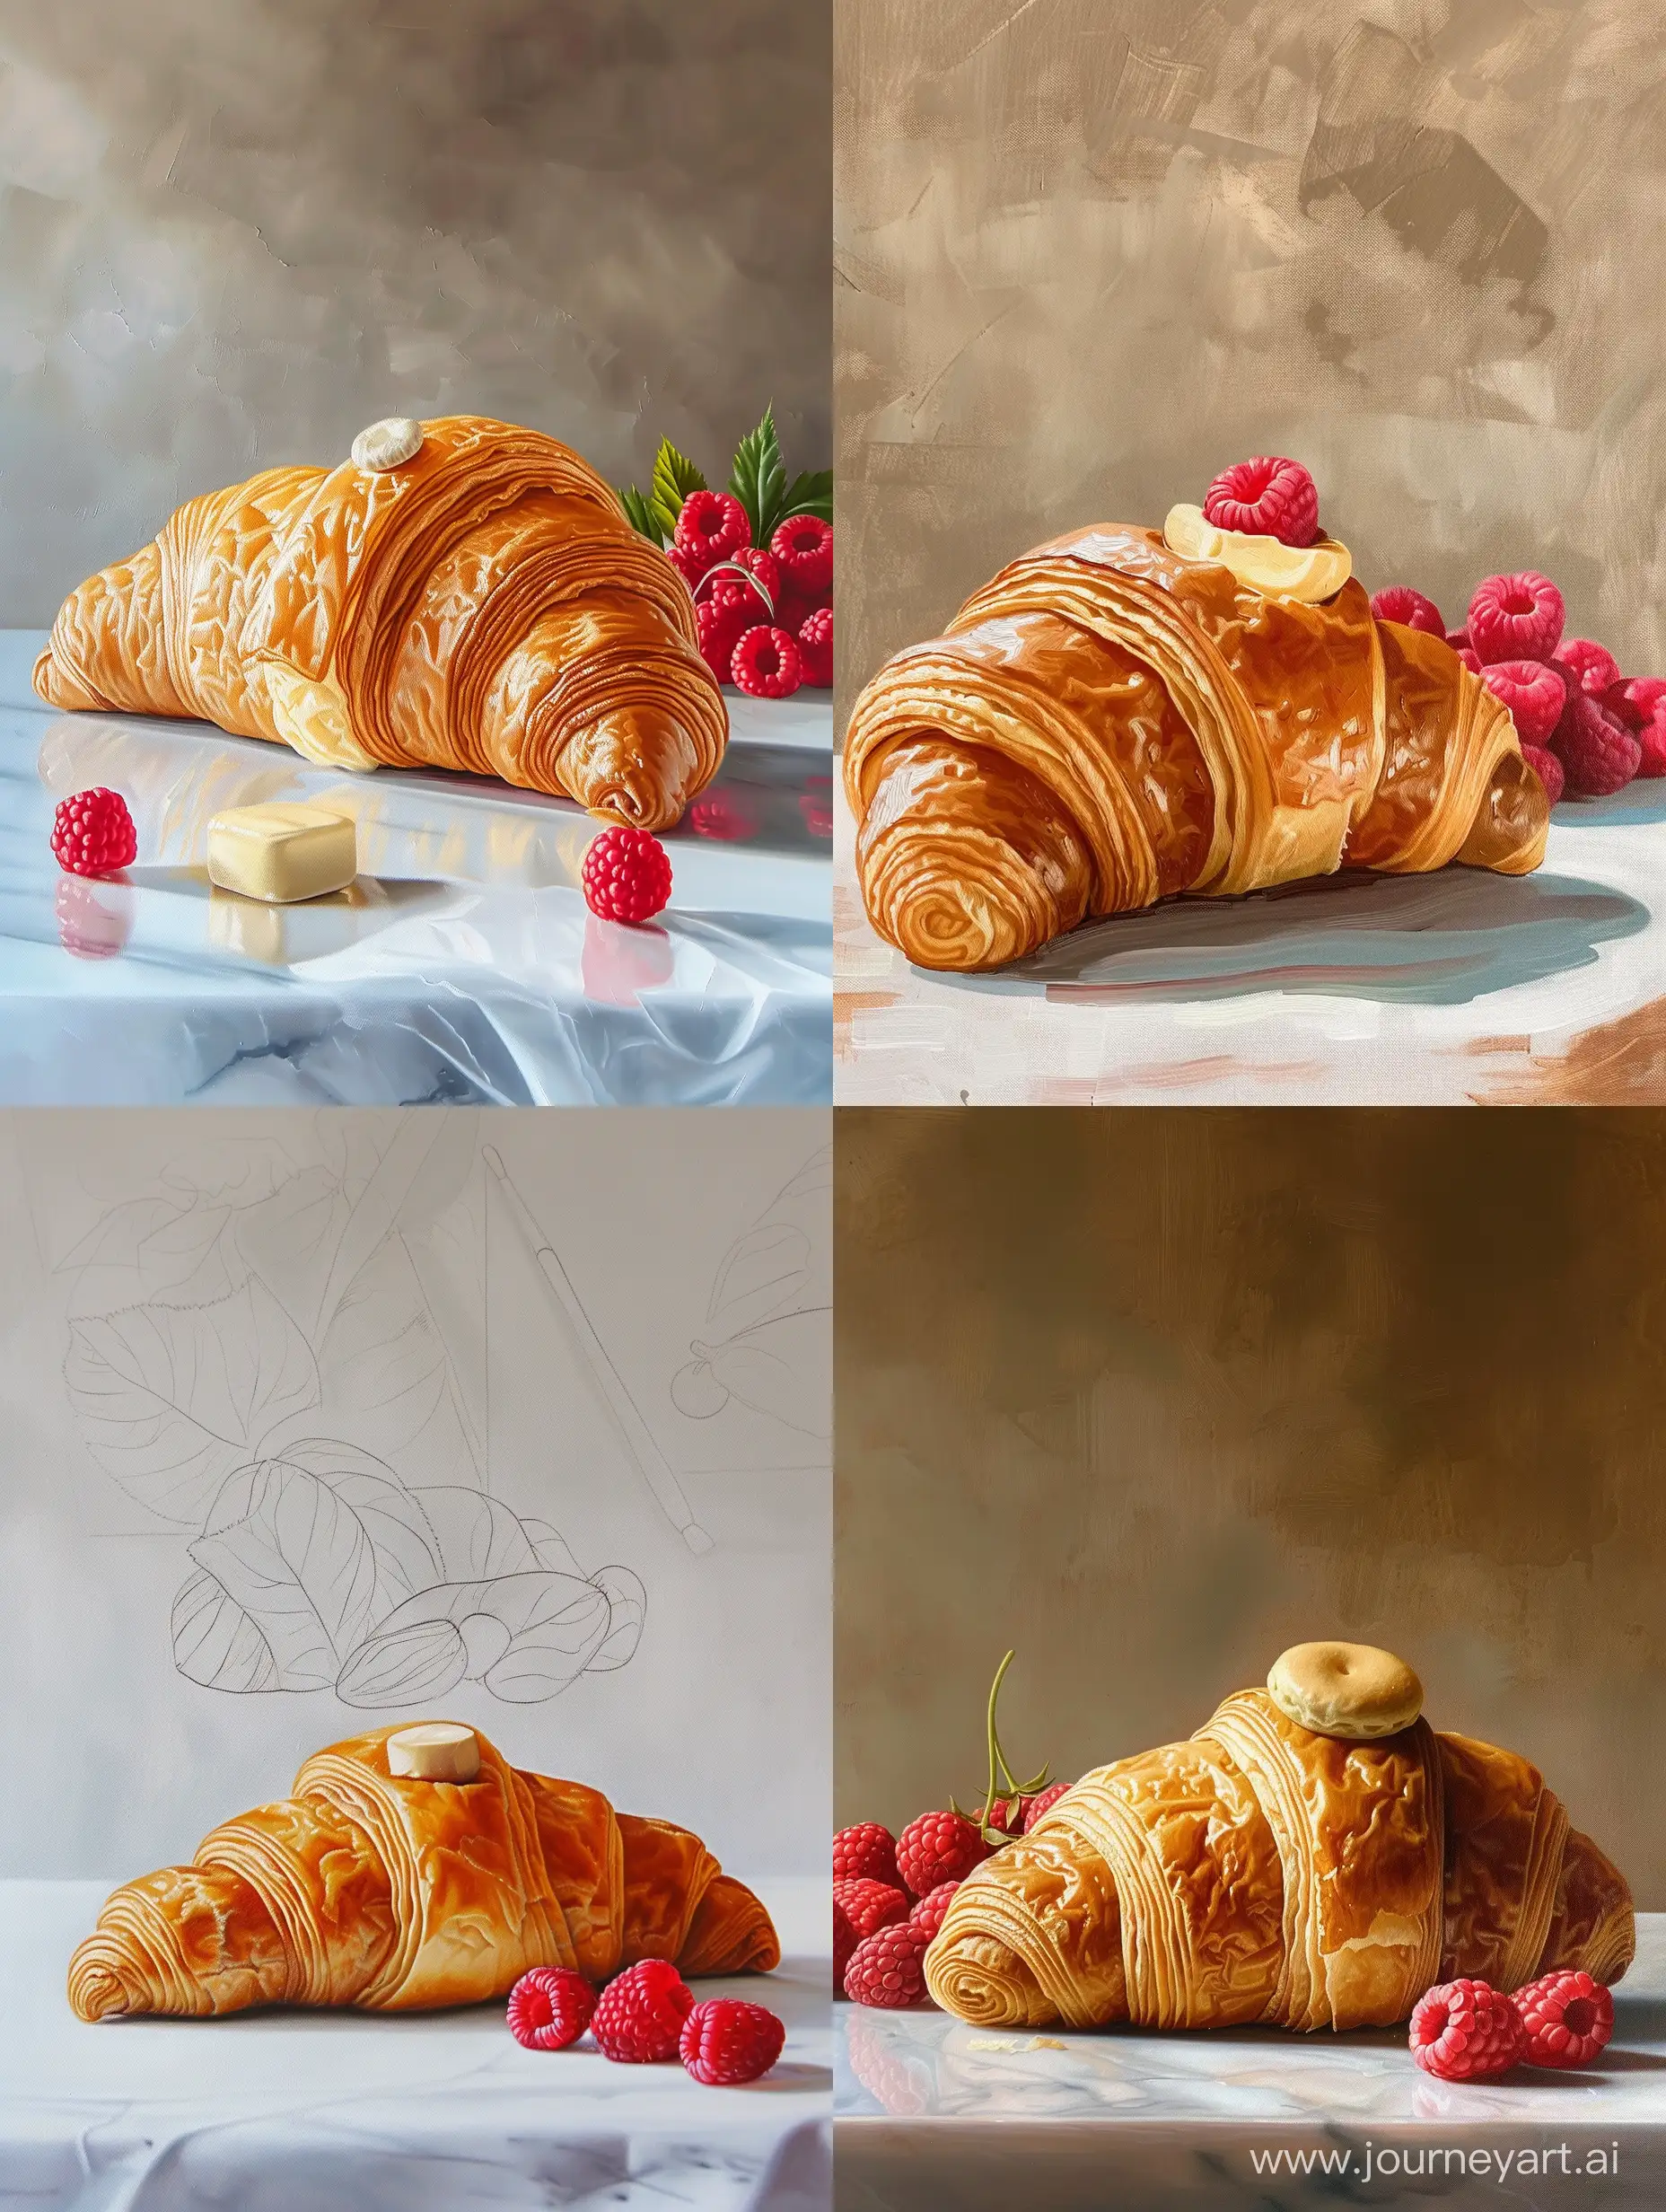 oil painting, outline, croissant on the table, butten on the croissant, raspberries behind the croissant